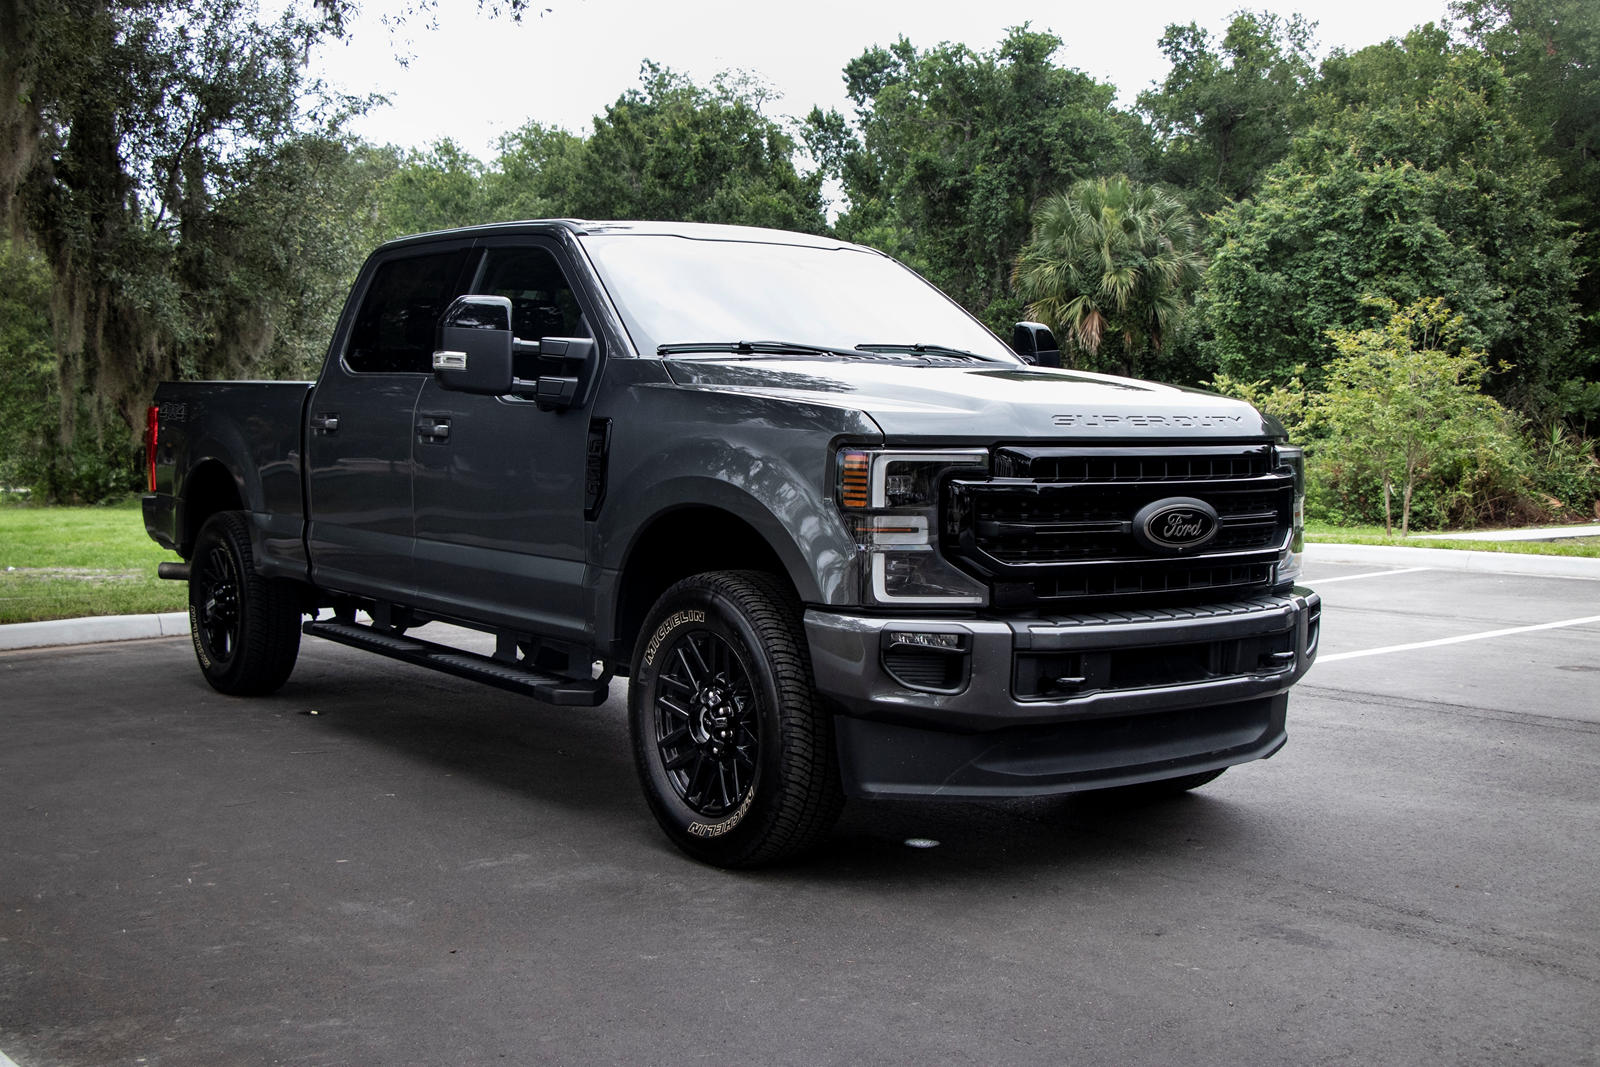 2020 Ford F250 Super Duty Review, Trims, Specs, Price, New Interior